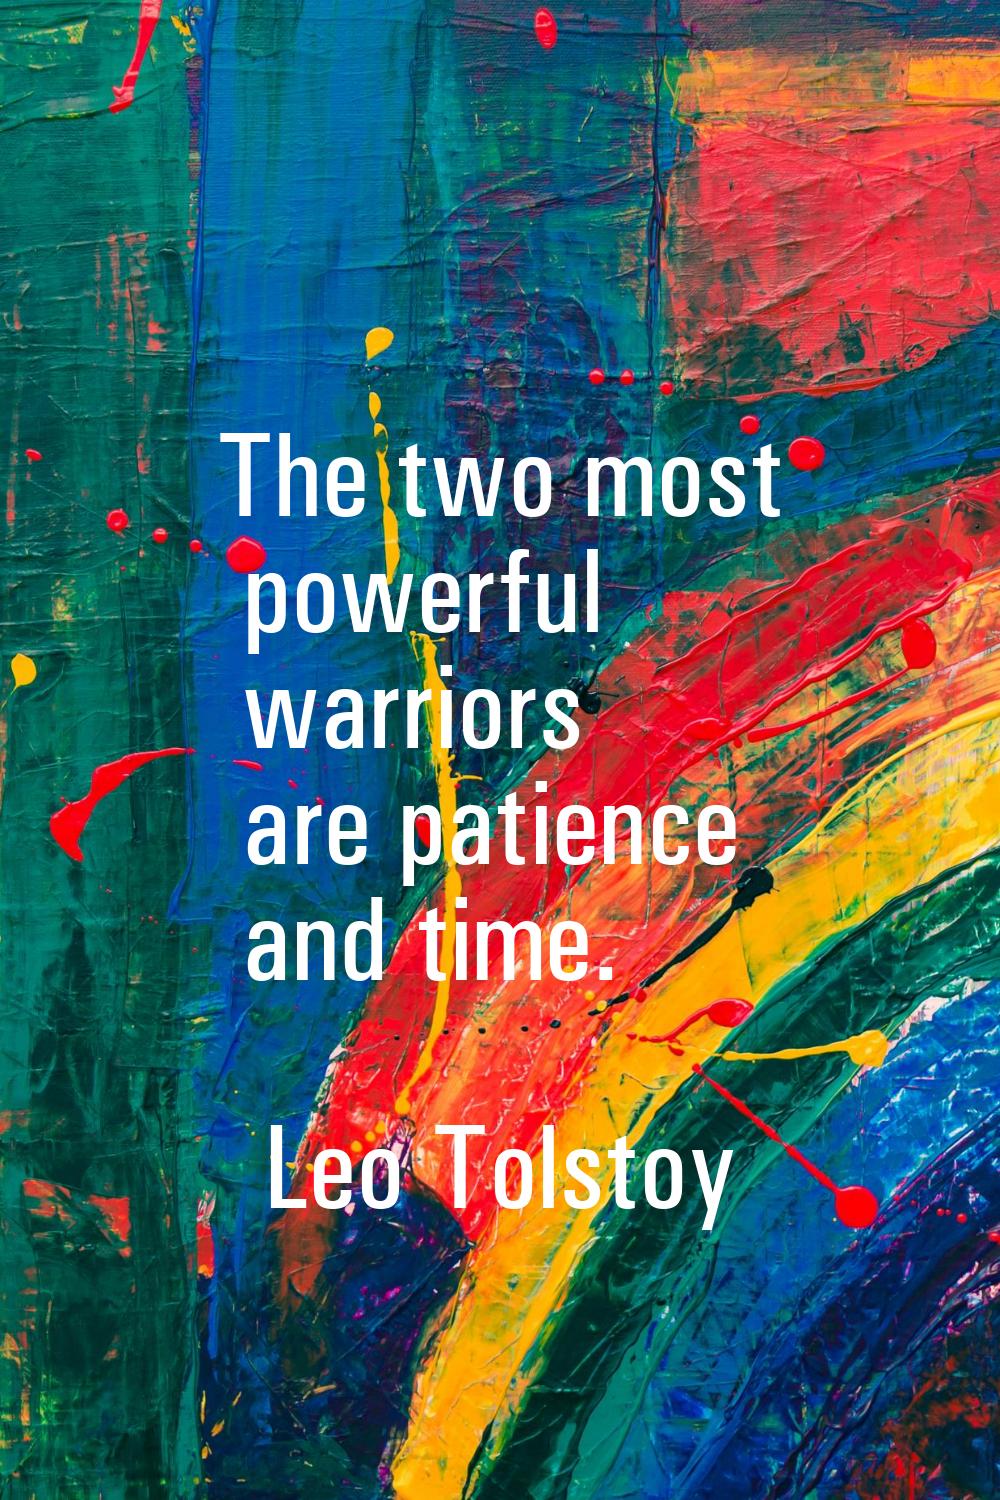 The two most powerful warriors are patience and time.